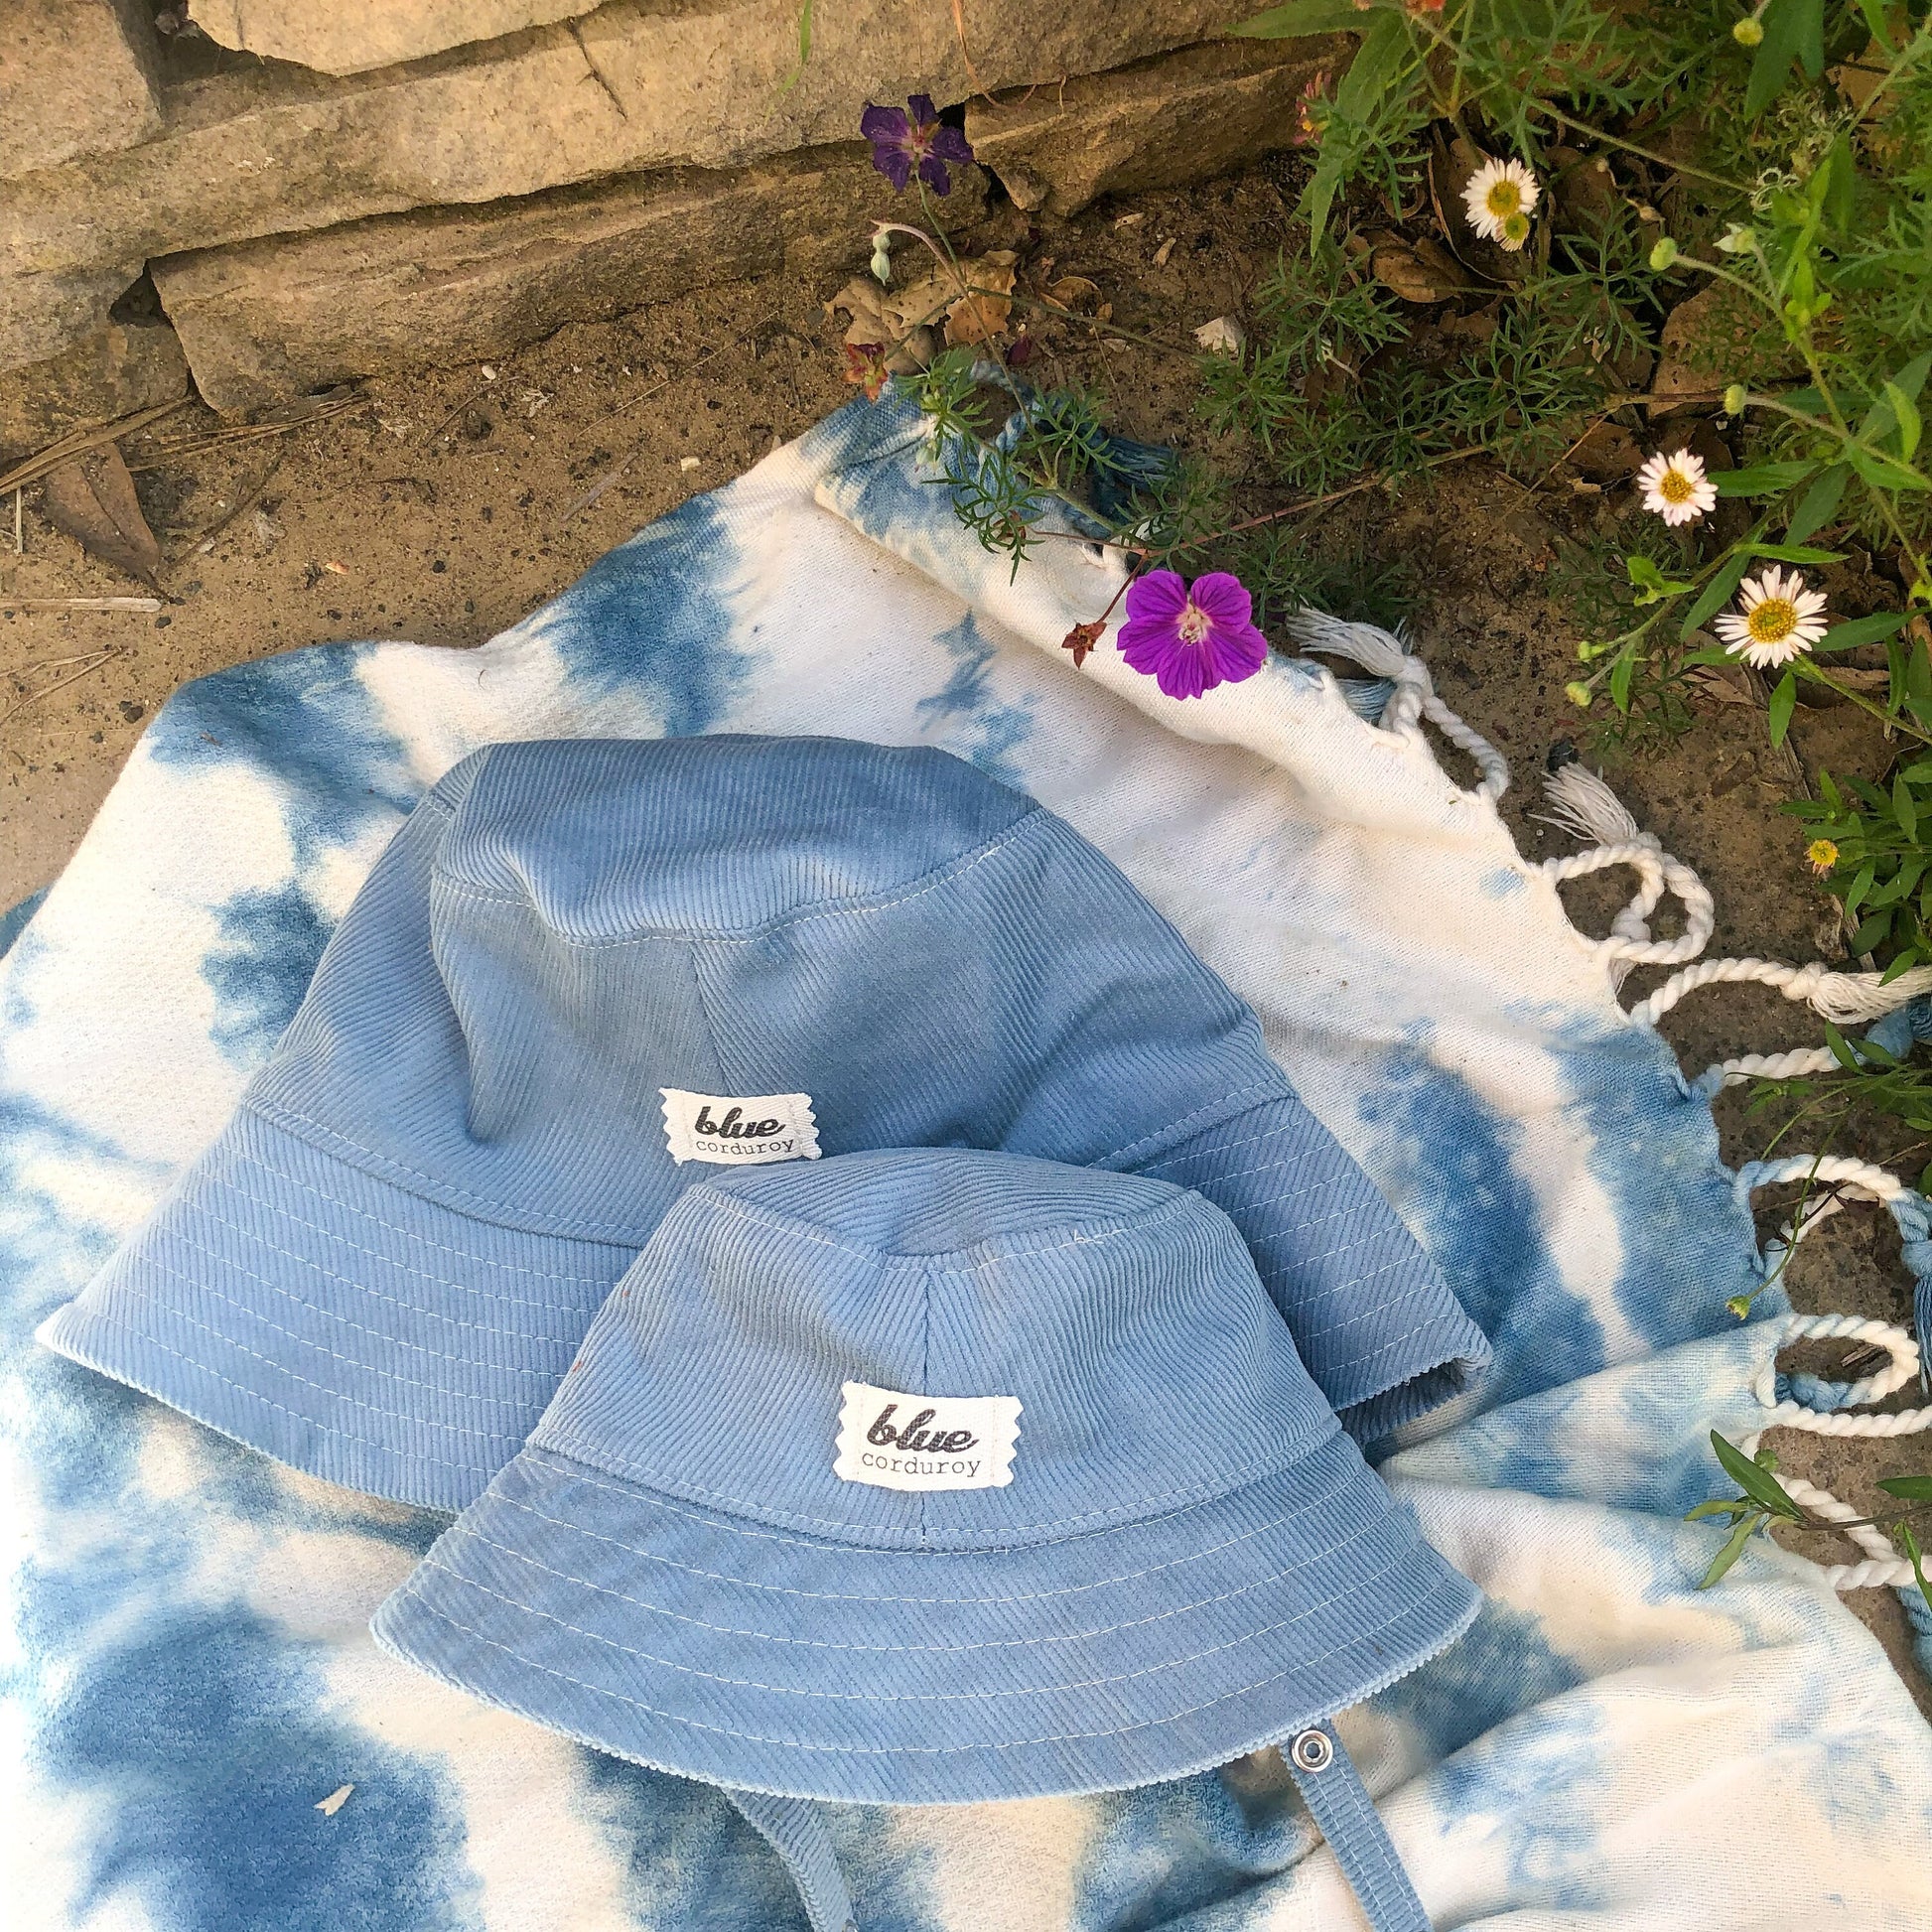 Mommy and Me Matching Hats, Corduroy Bucket Hats, Blue Sun Hat, Mama and Mini Set, Babies First Summer, Beach Hat, Family Vacation